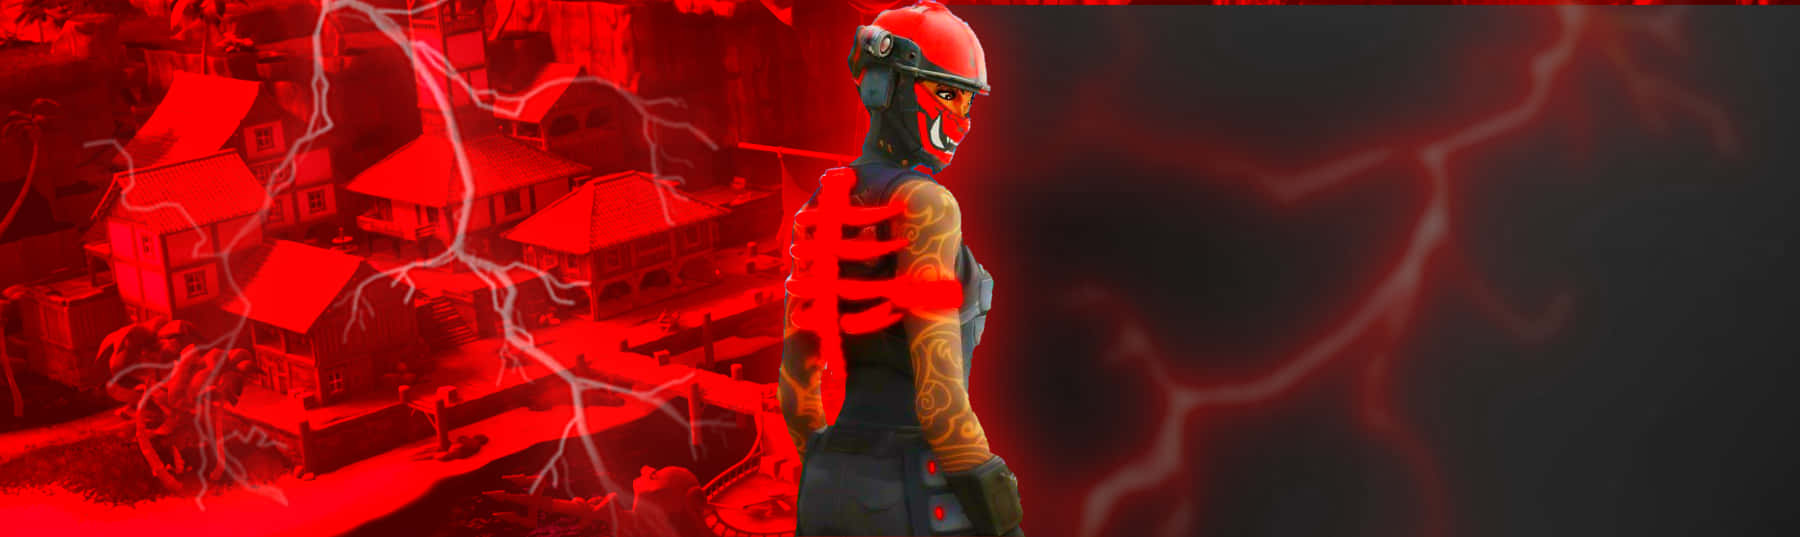 Join The Fun With The New Manic Skin From Fortnite Wallpaper